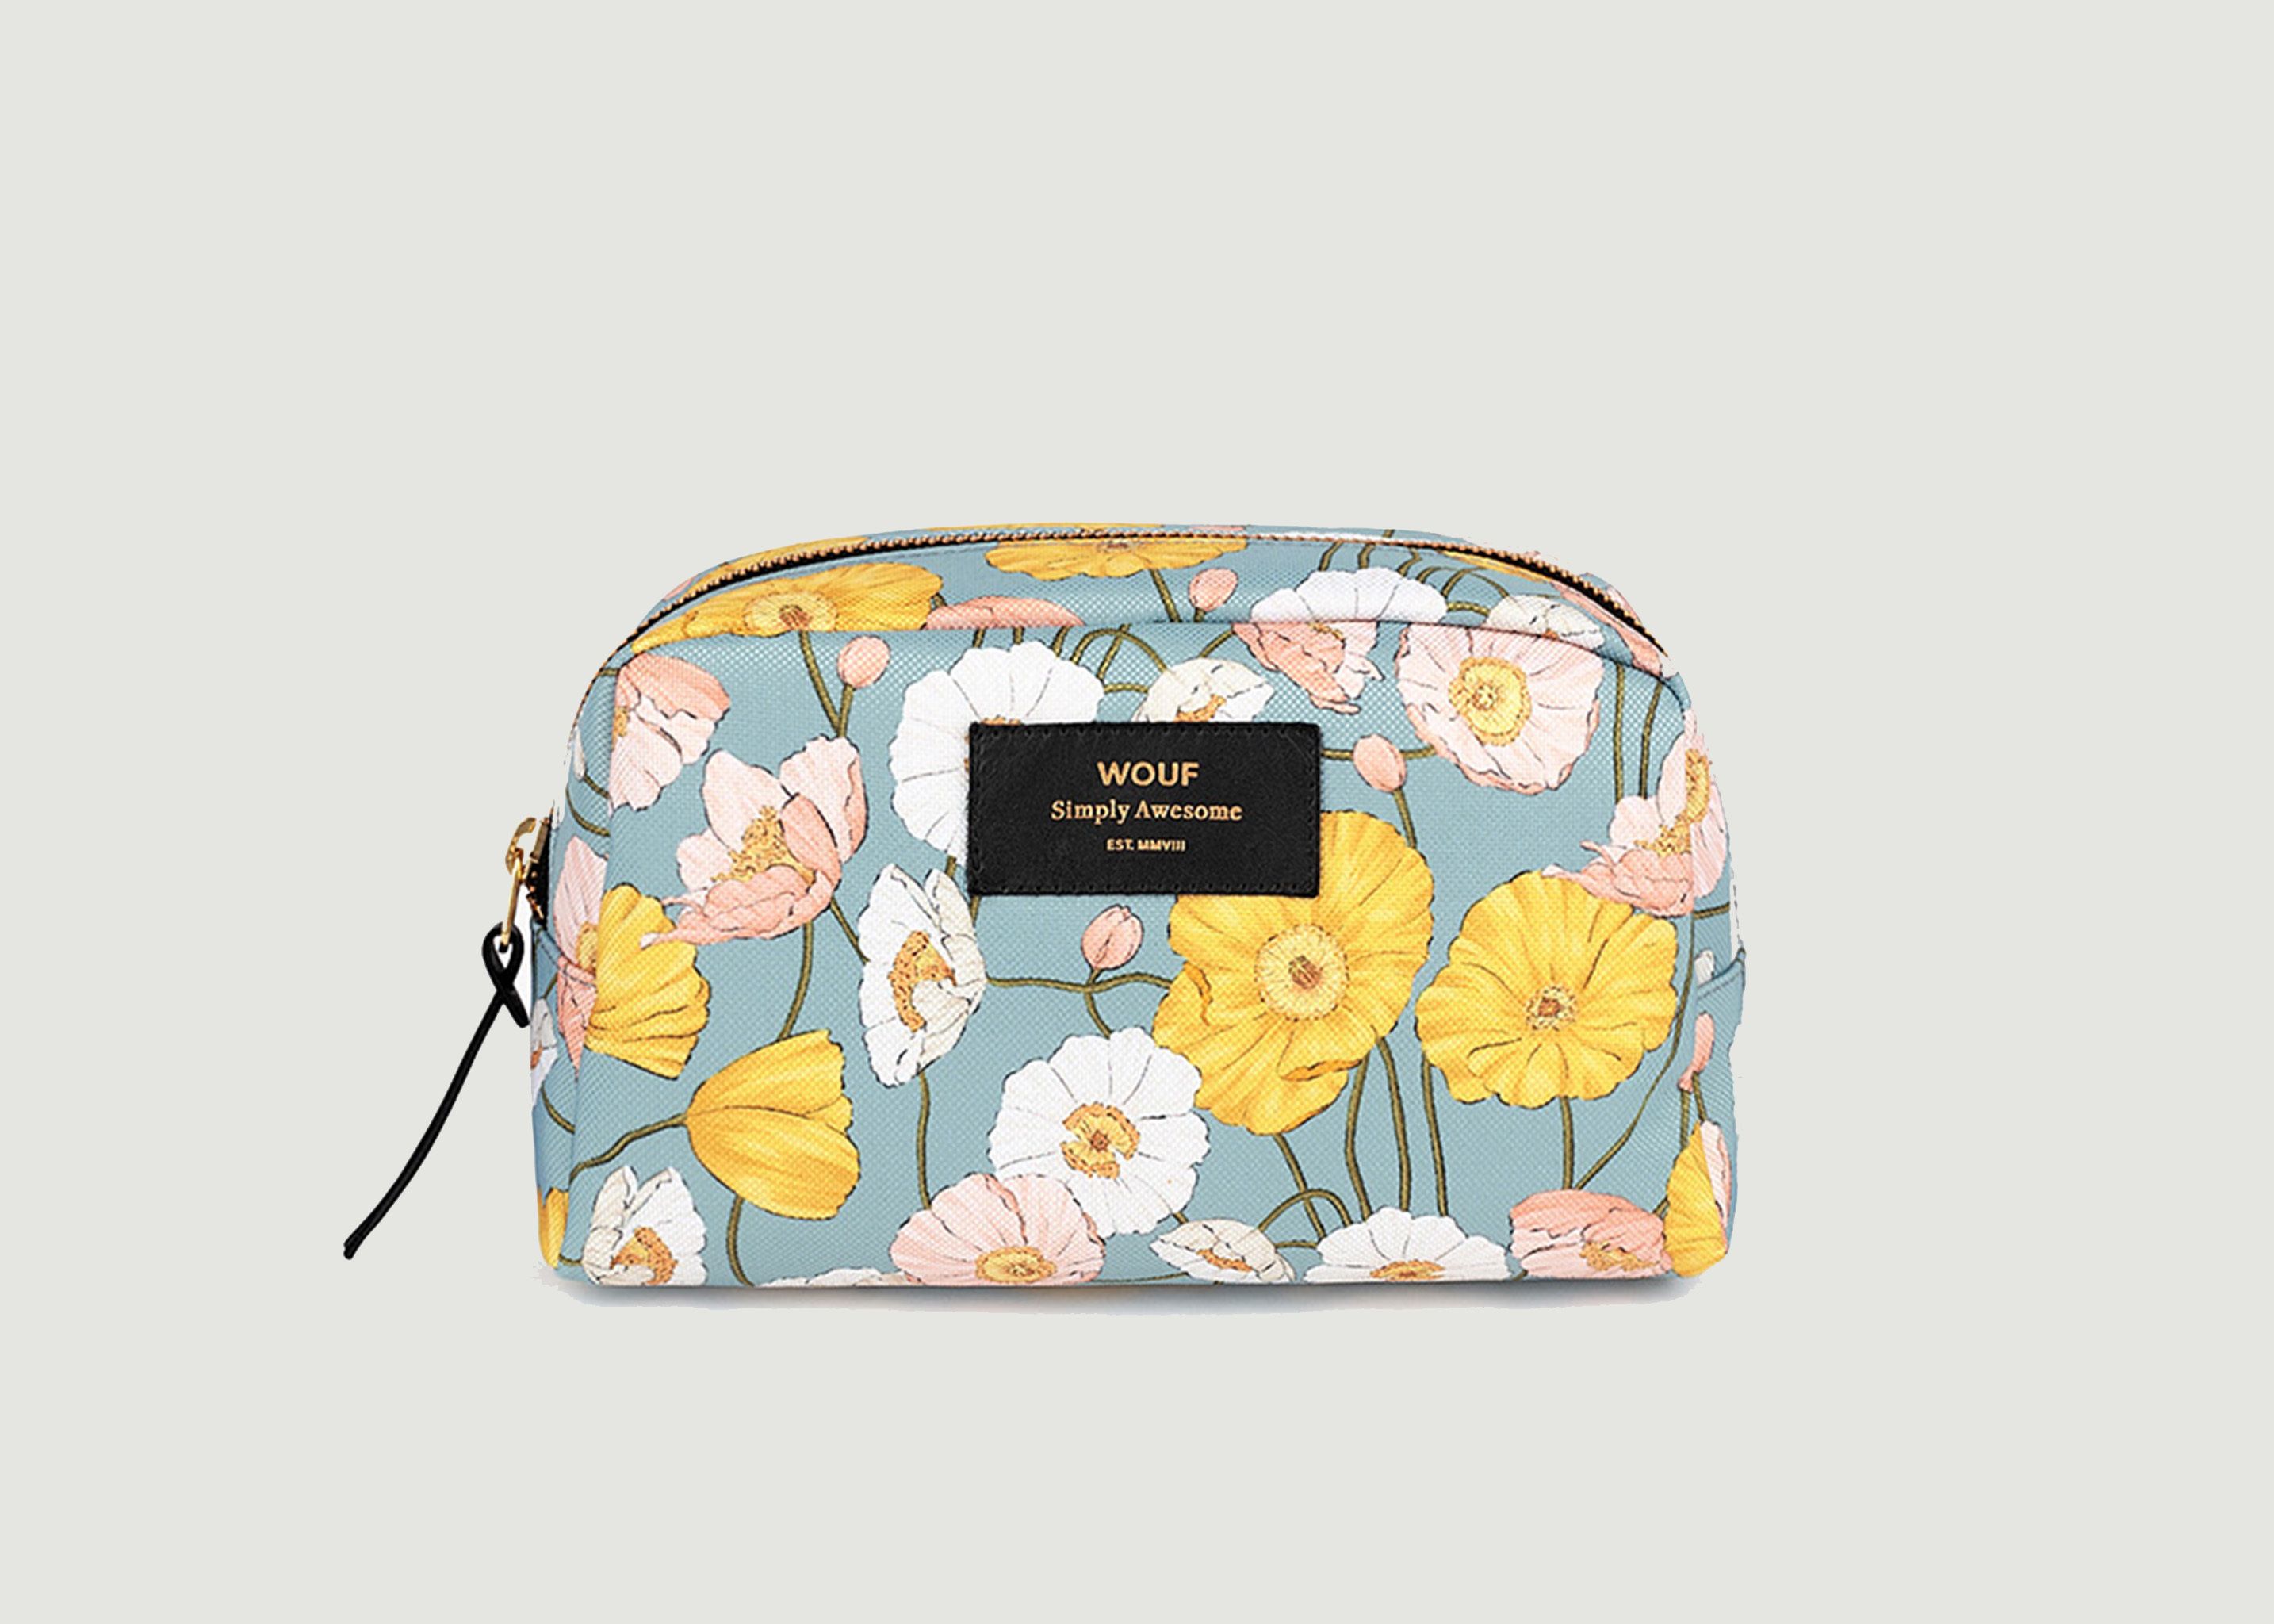 Alicia Beauty Toiletry Case - Wouf